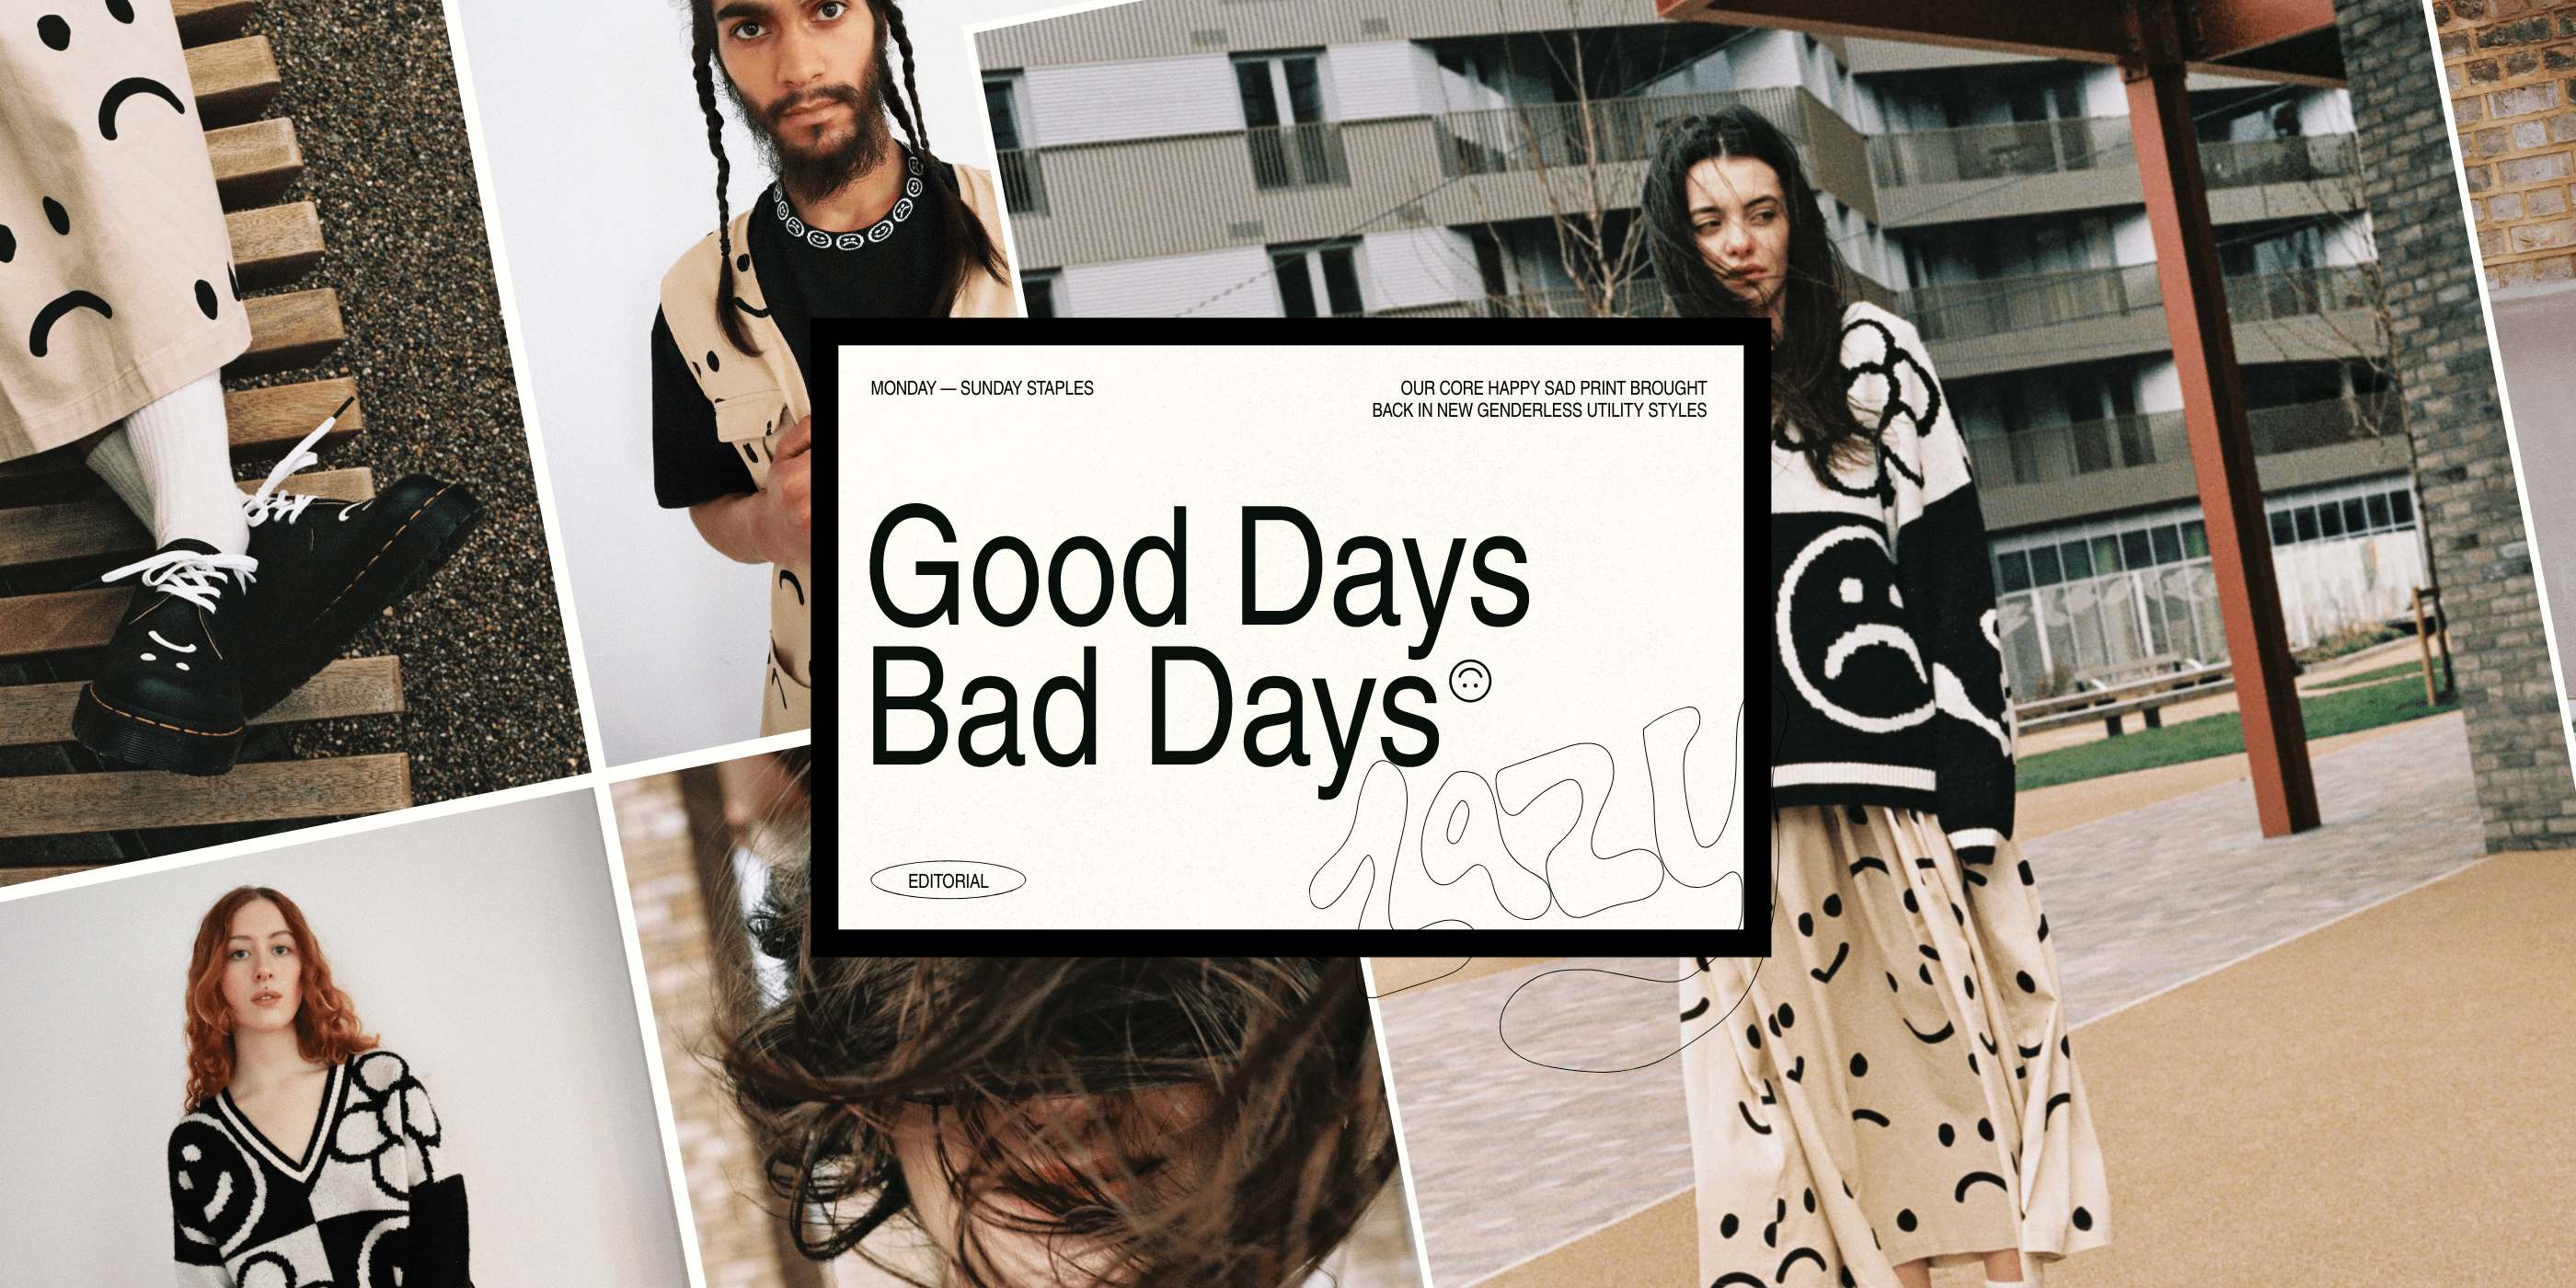 GOOD DAYS BAD DAYS - OUR MONDAY TO SUNDAY STAPLES